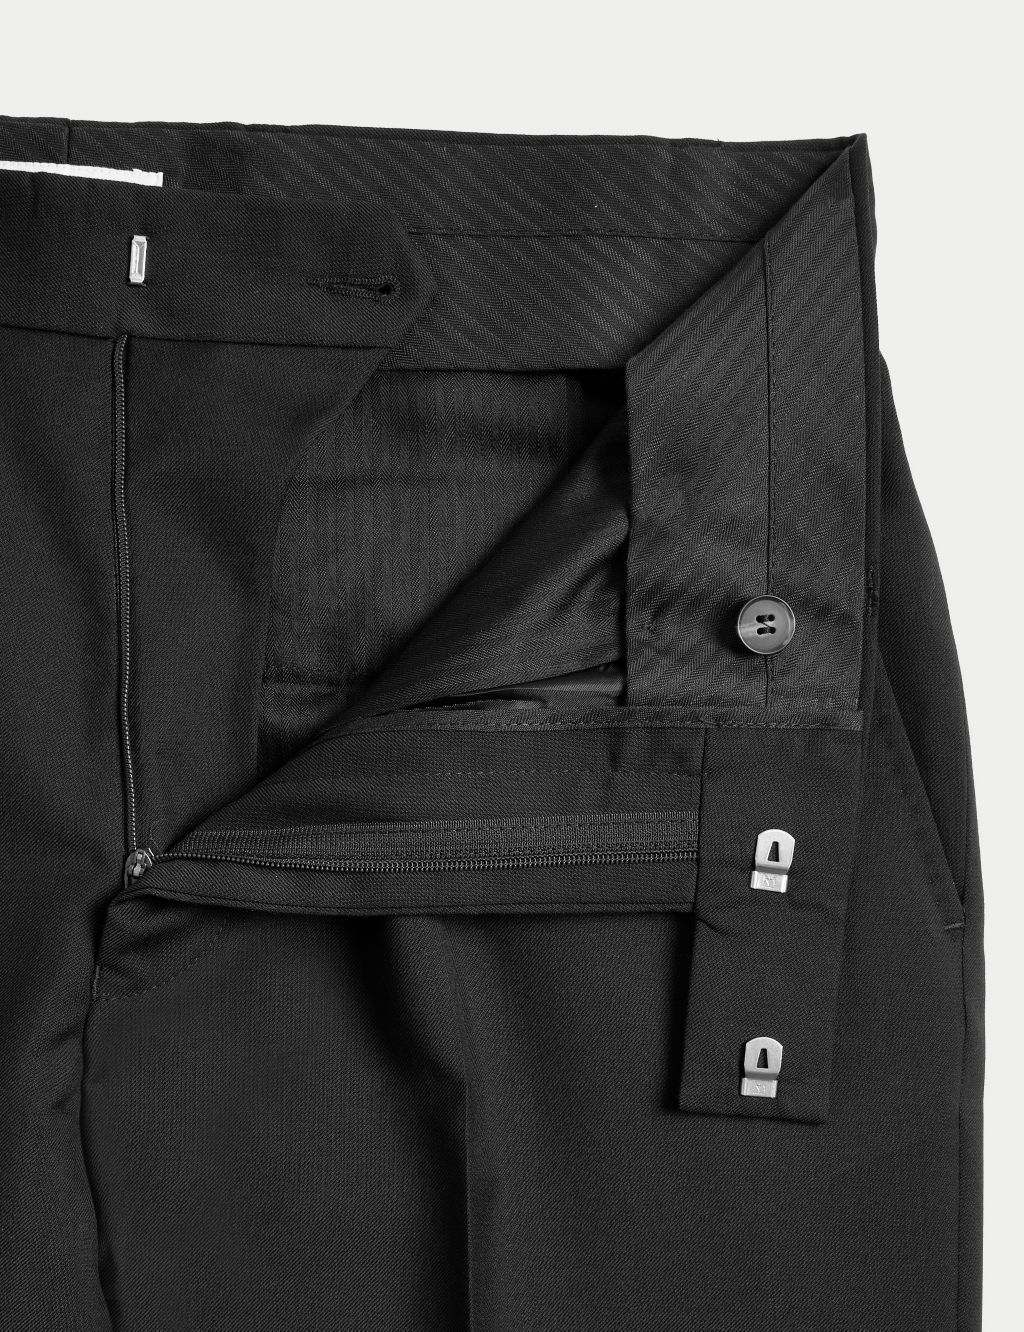 Tailored Fit Pure Wool Twill Trousers image 8